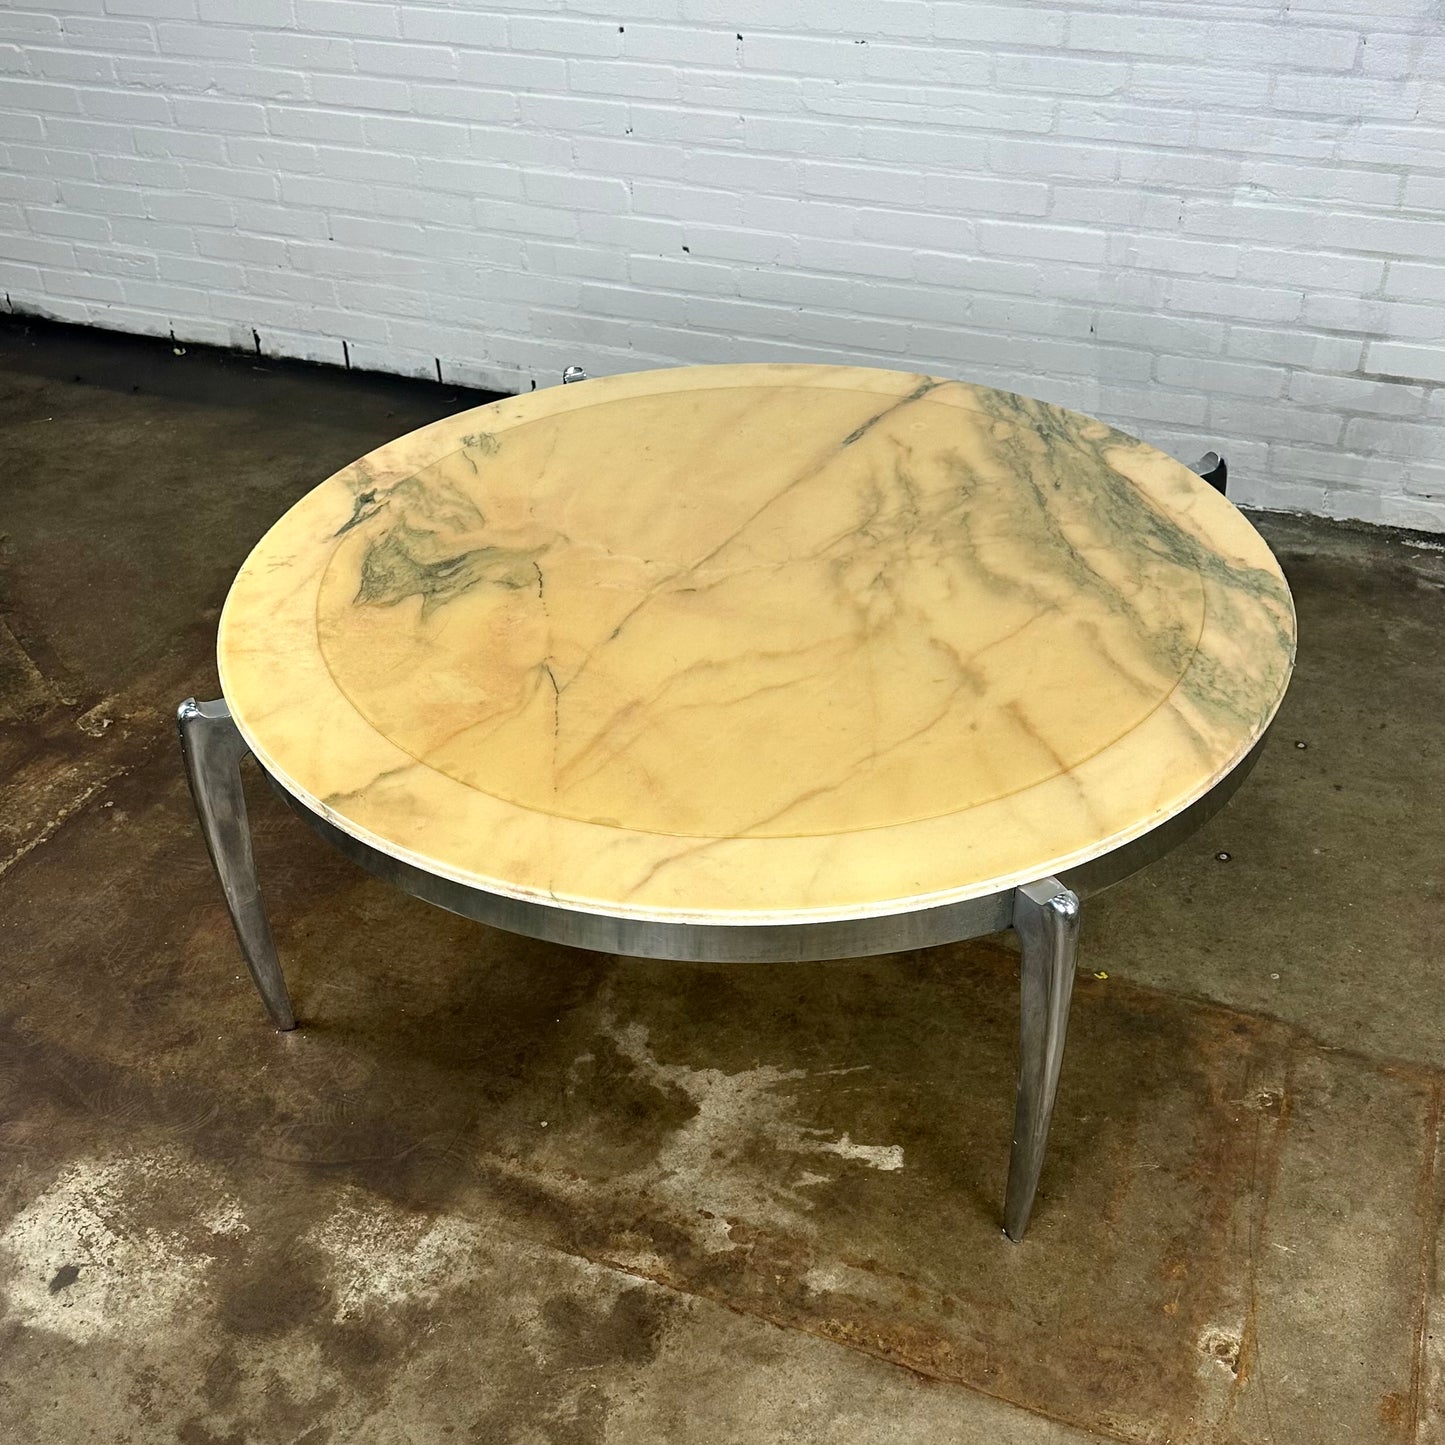 coffee-table-made-of-marble-and-stainless-steelcoffee-table-made-of-marble-and-stainless-steel